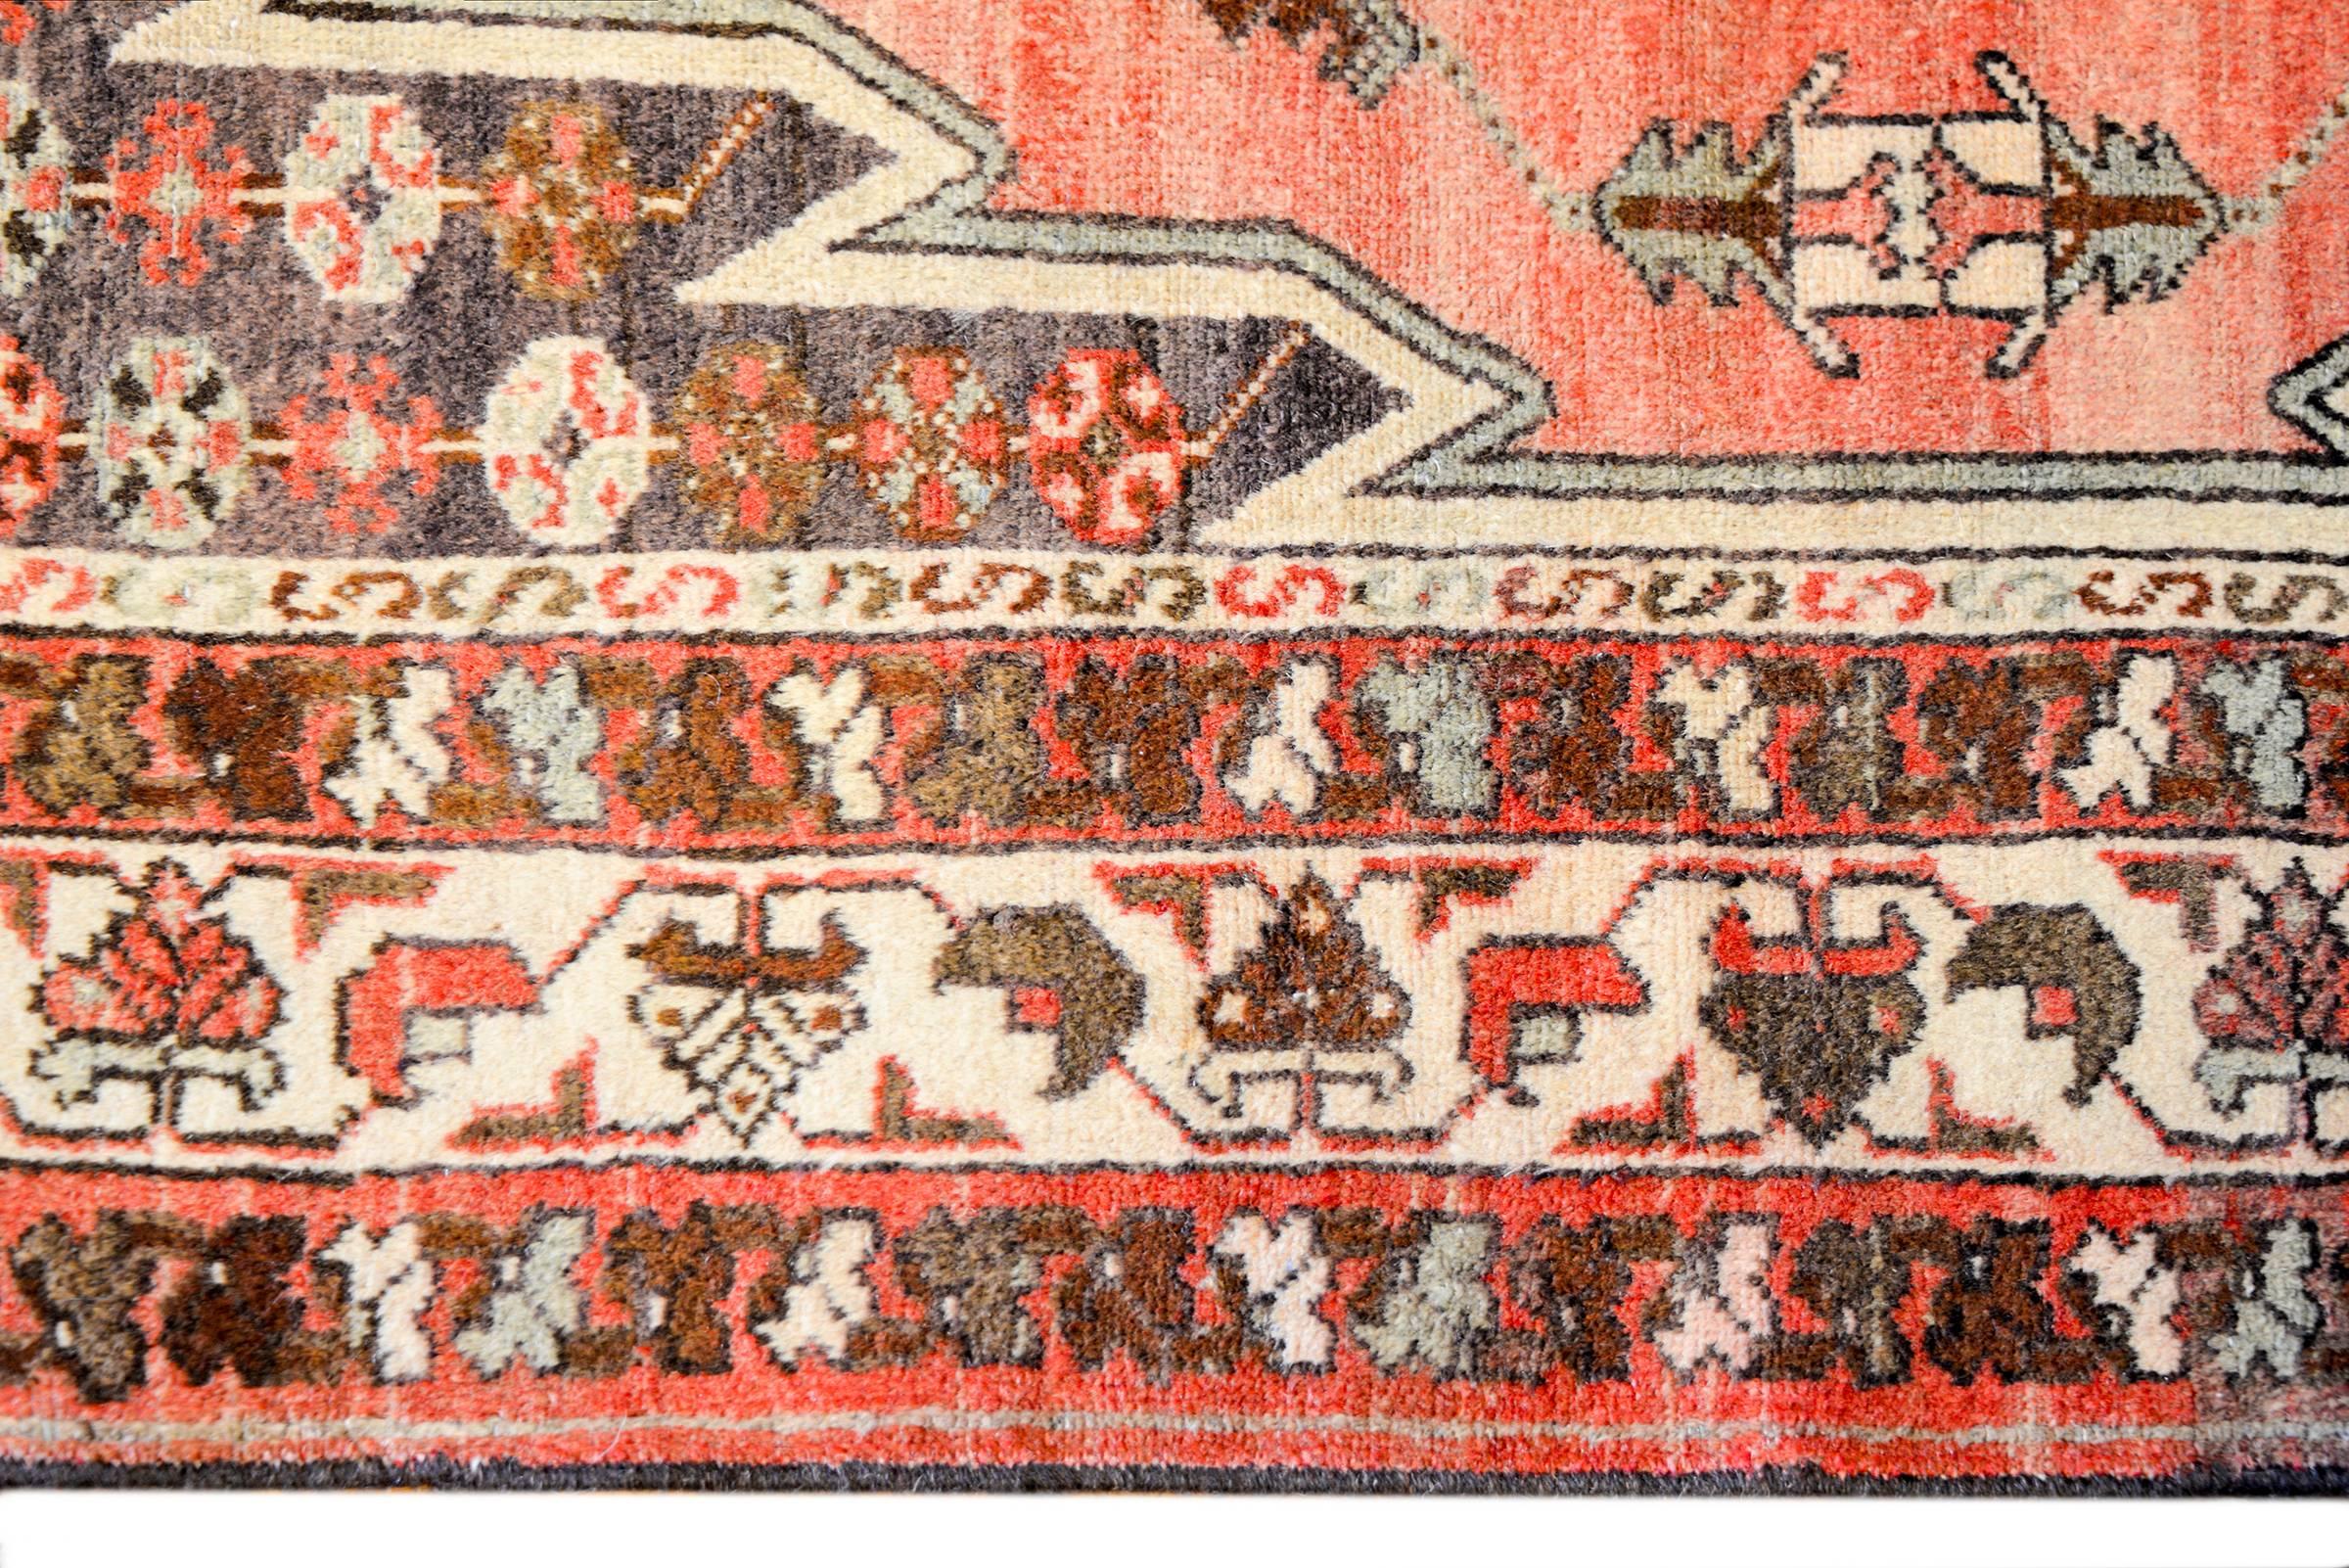 Vegetable Dyed Gorgeous Early 20th Century Malayer Rug